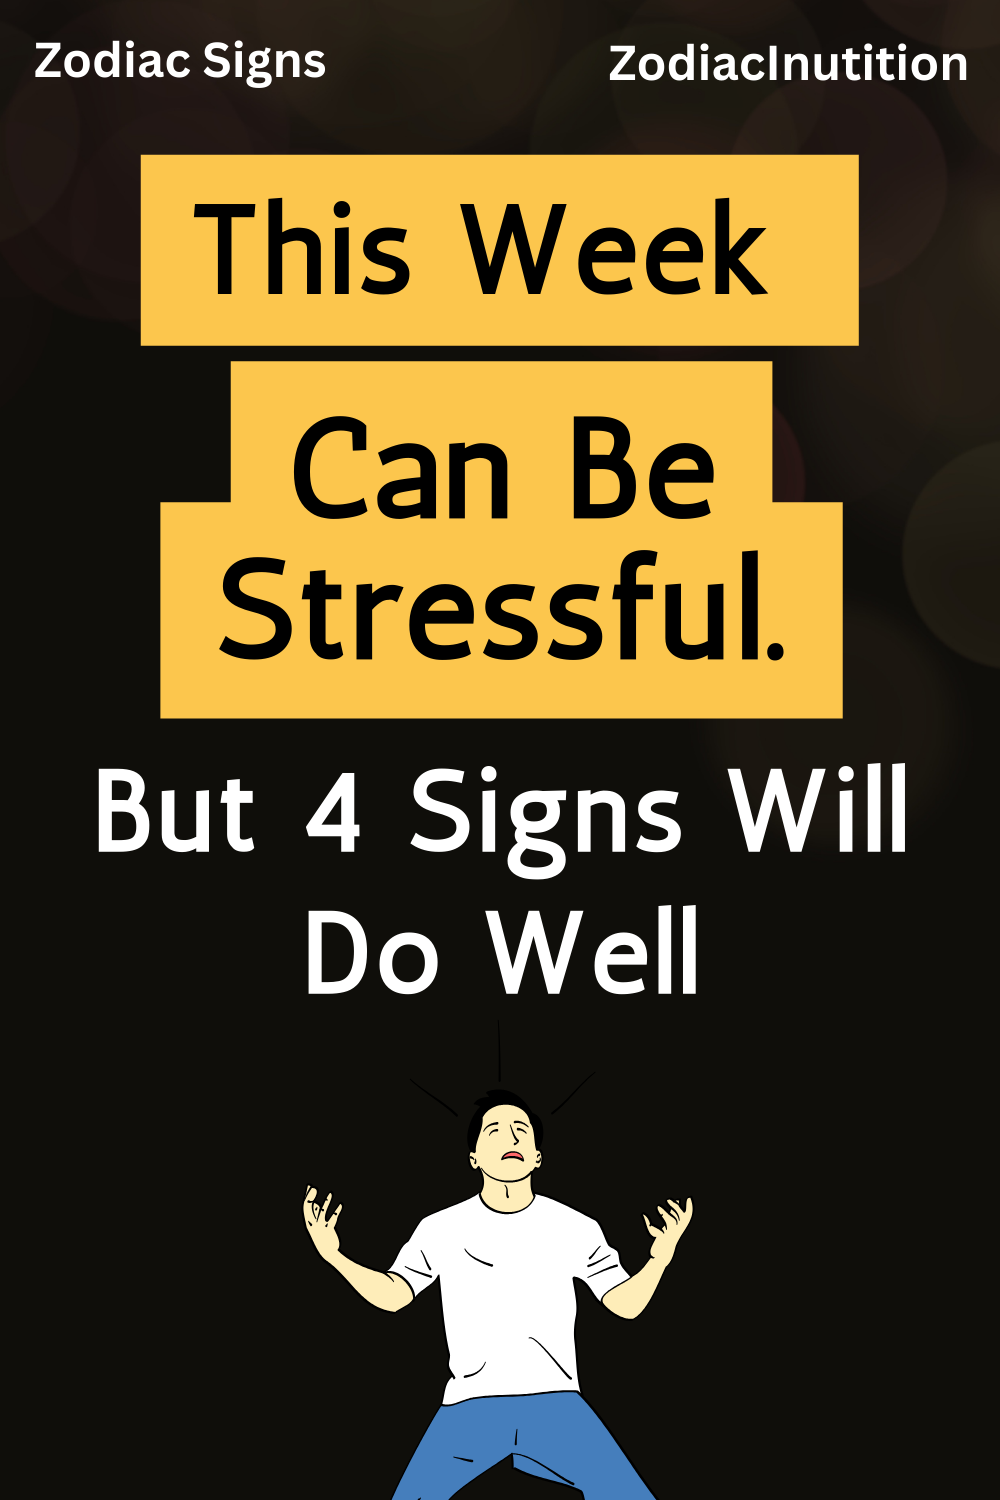 This Week Can Be Stressful. But 4 Signs Will Do Well